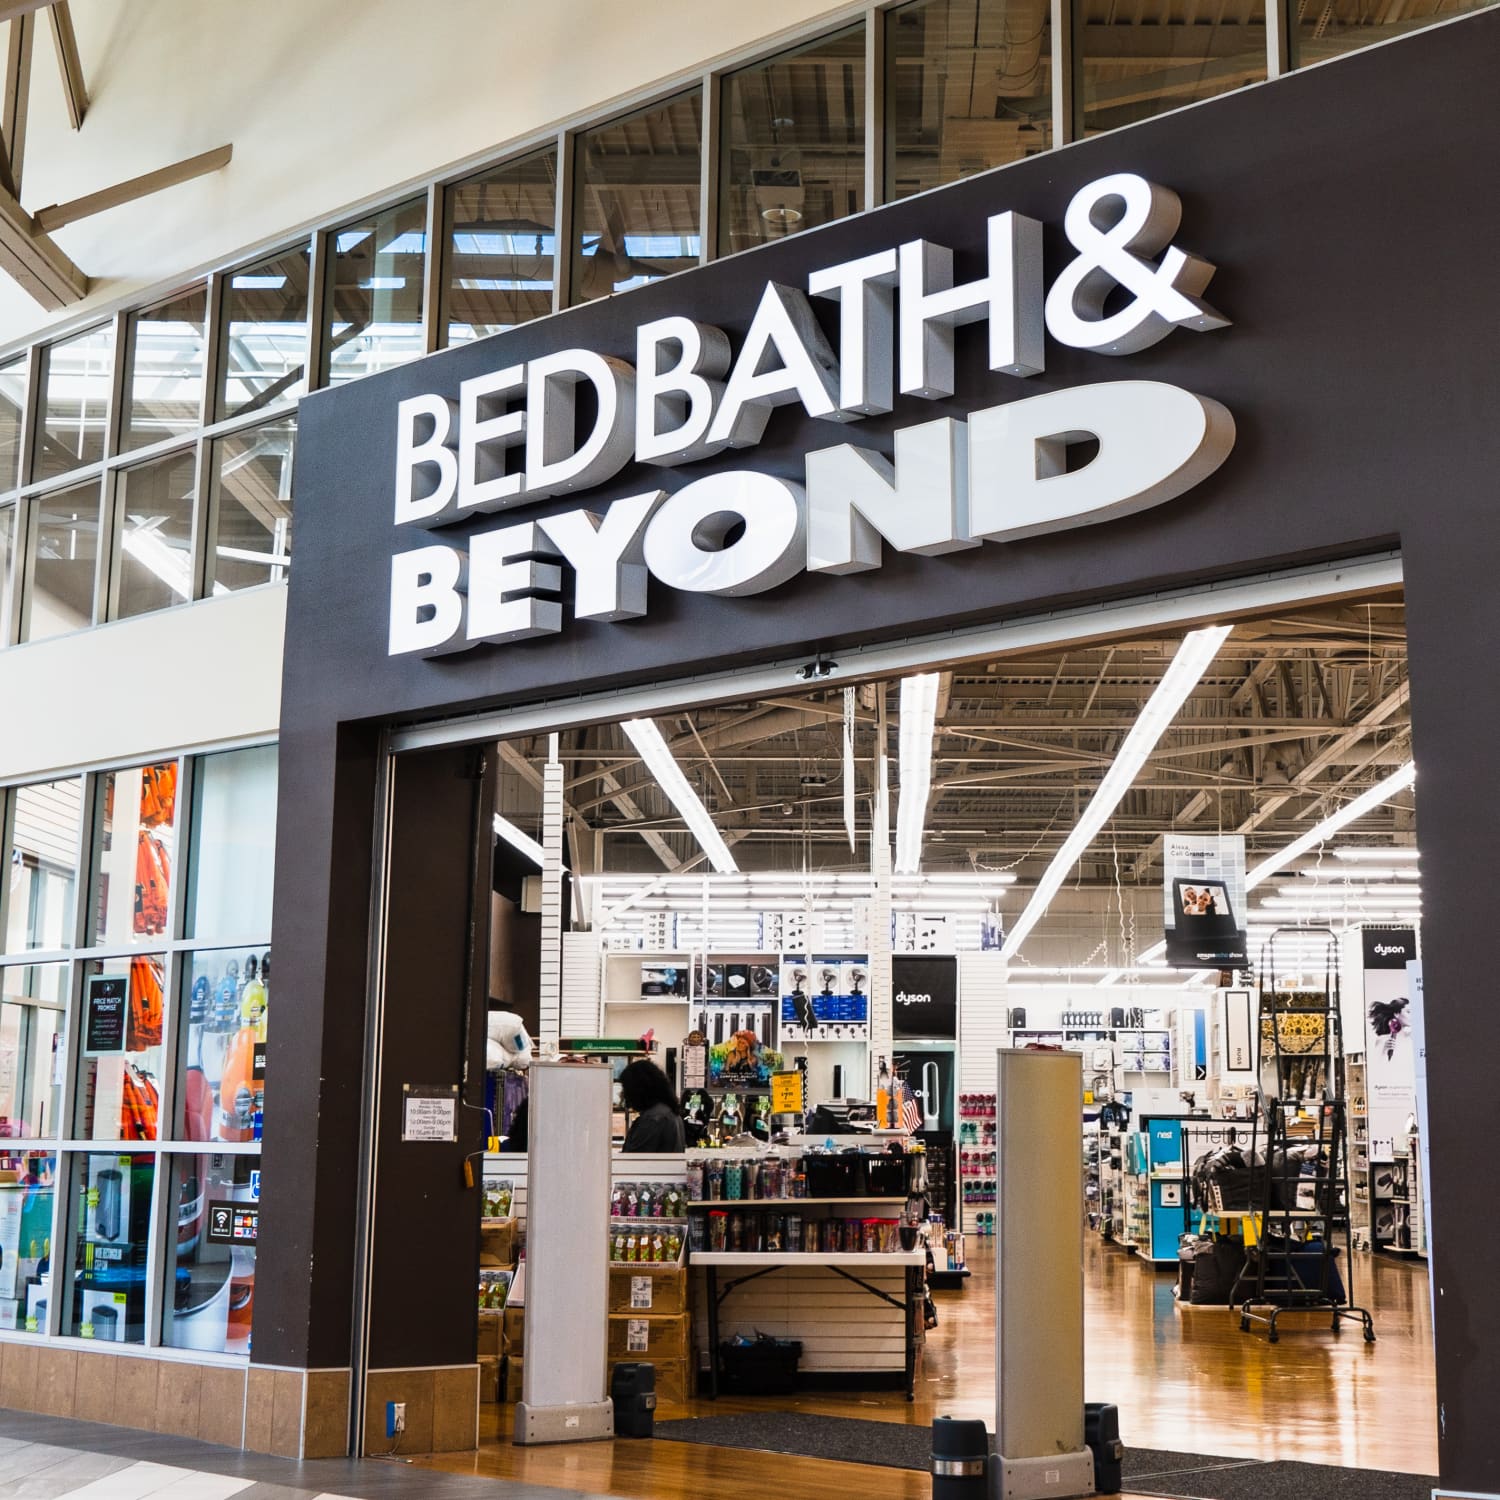 Bed Bath & Beyond is back, but 'much bigger, better,' Overstock